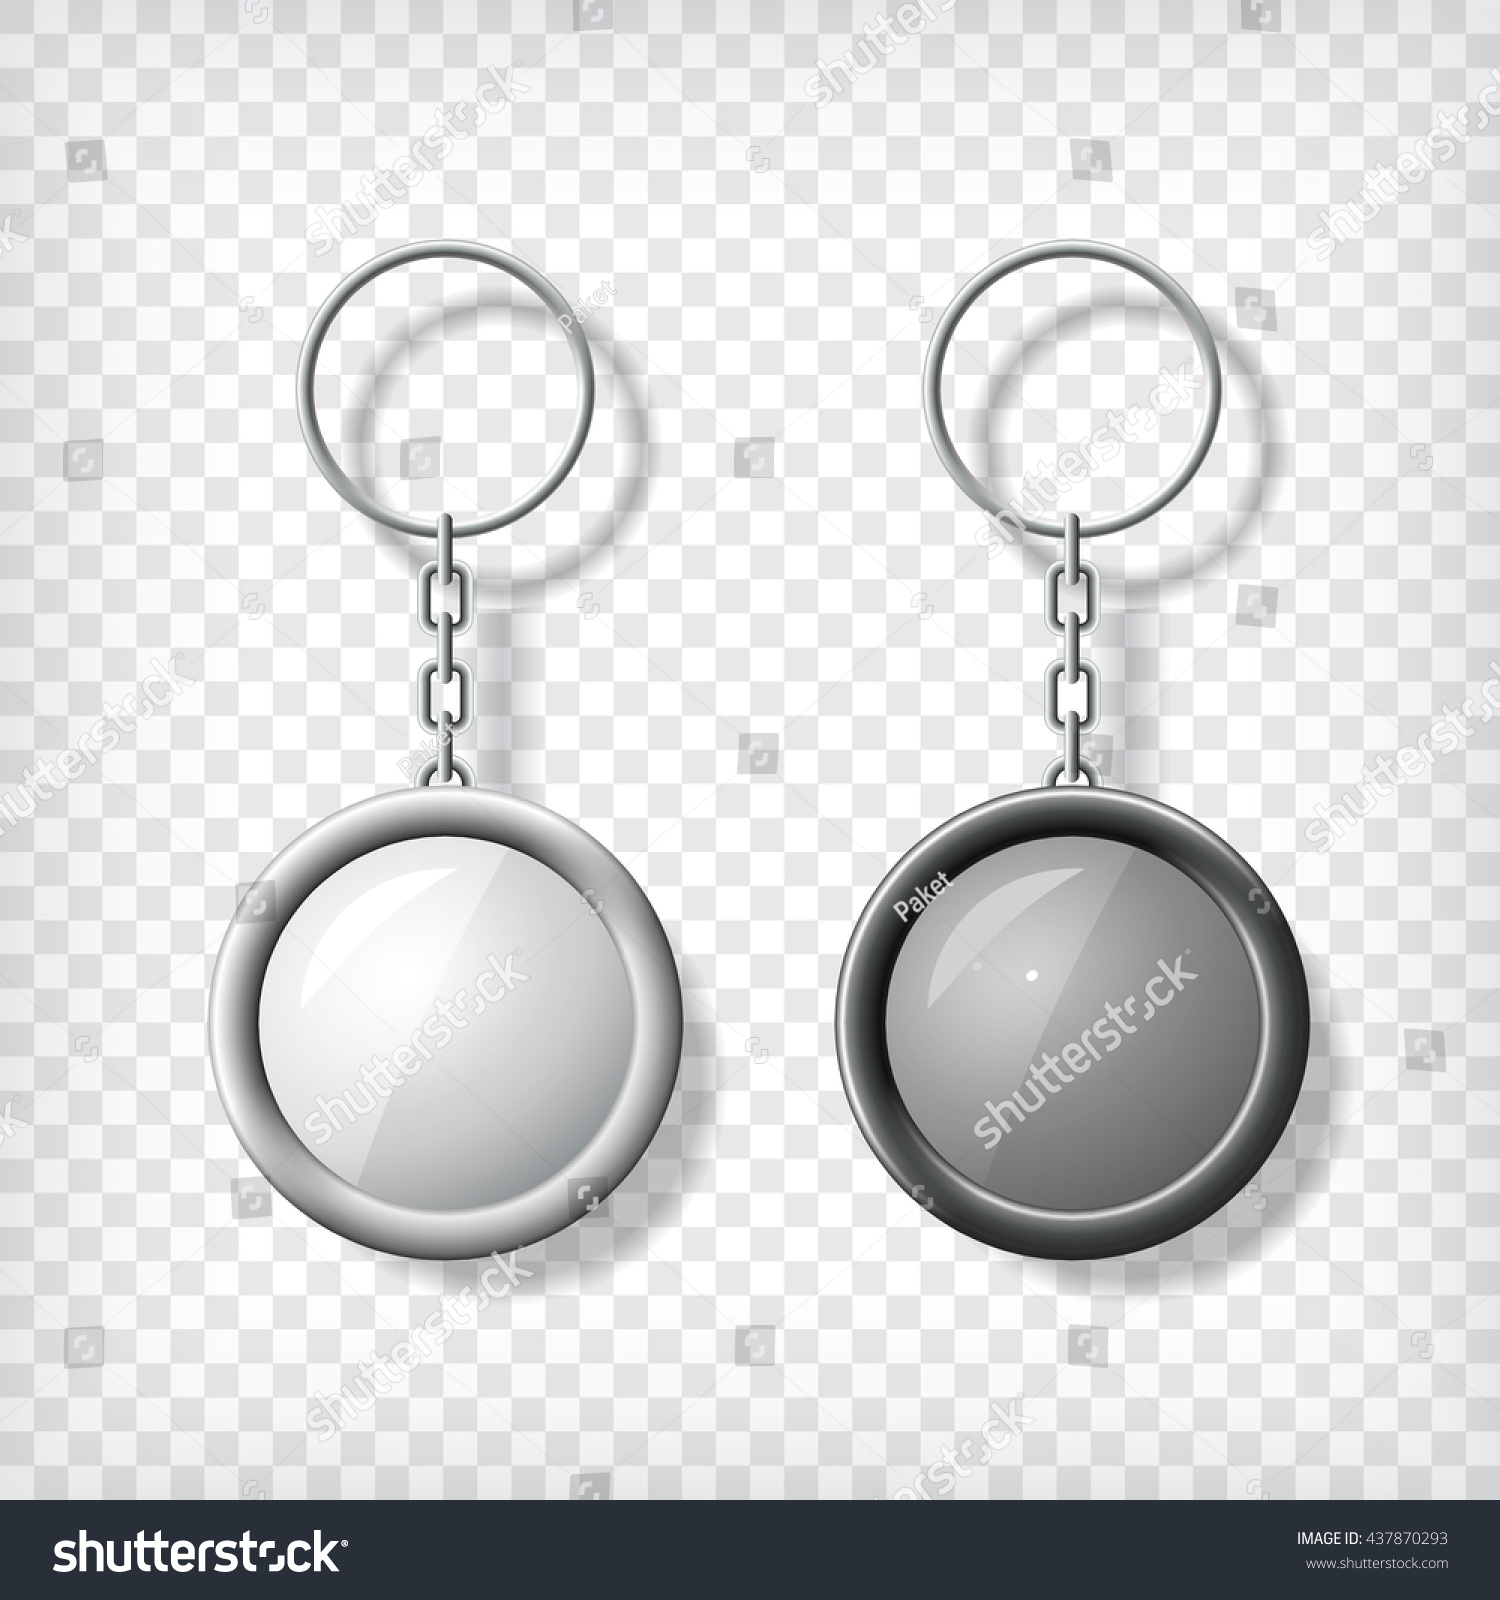 Download Two Key Chain Pendants Mockup Transparent Stock Vector ...